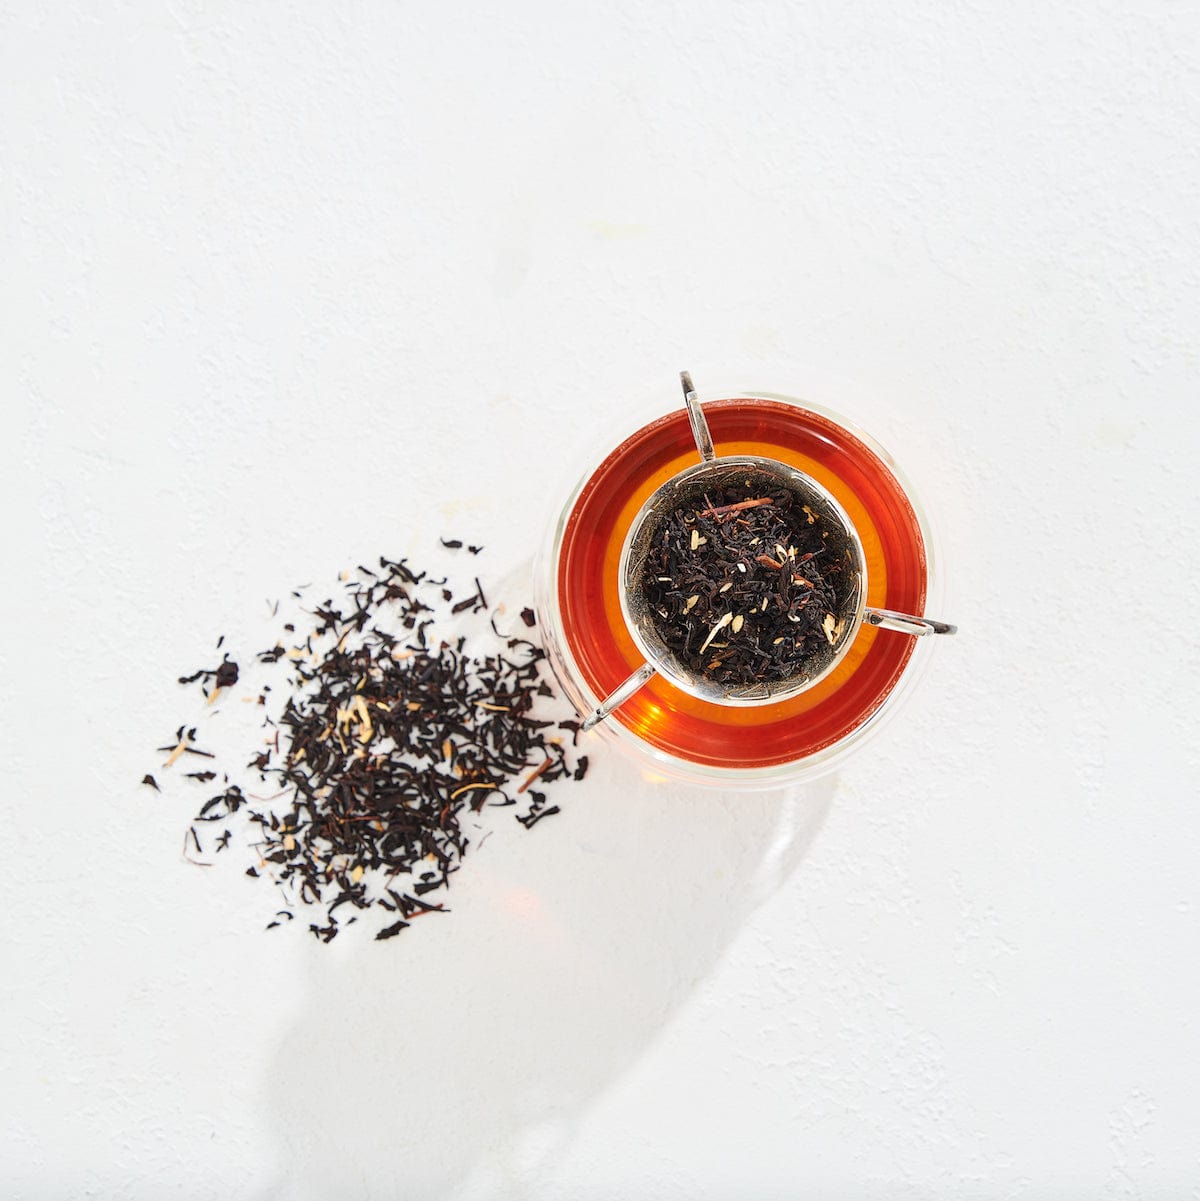 A cup filled with amber-colored Virgo Tea of Virtue, Wit &amp; Meticulous Magic sits on a white surface with a tea strainer containing loose tea leaves resting on top. To the left of the cup, a small pile of loose leaf tea is scattered on the surface. The scene is brightly lit, evoking a serene Magic Hour moment.